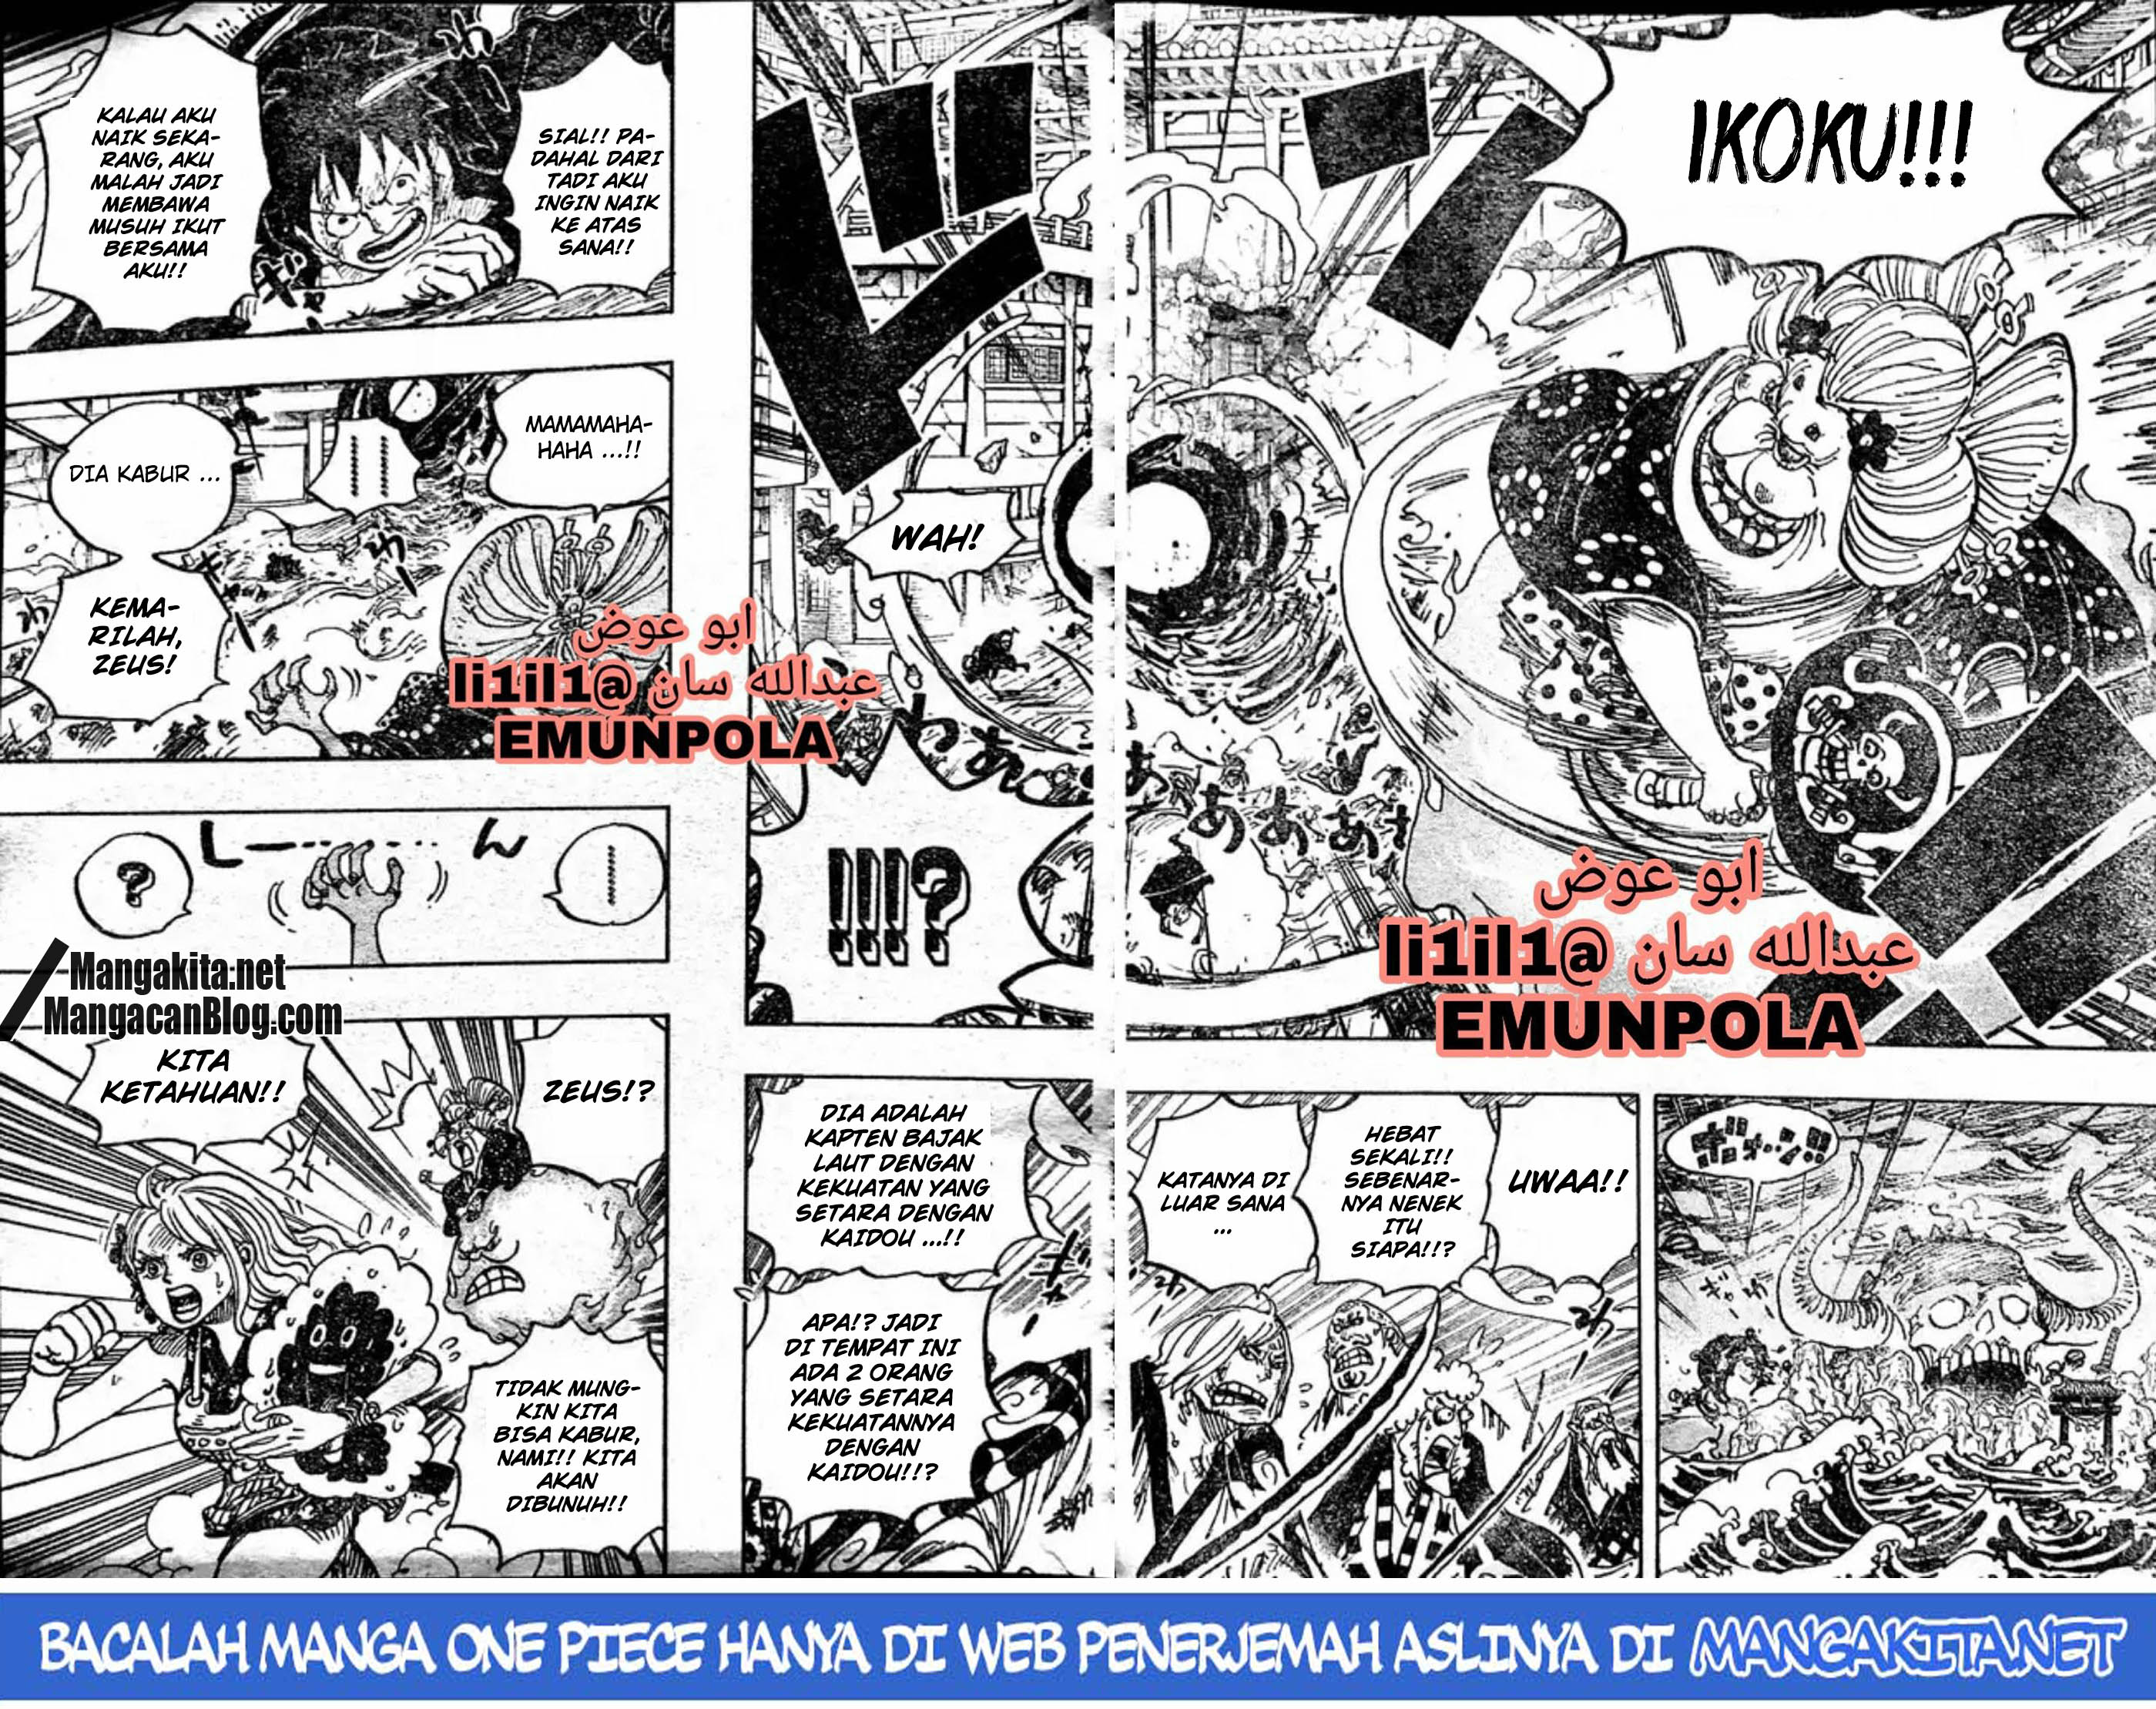 One Piece  Chapter 988